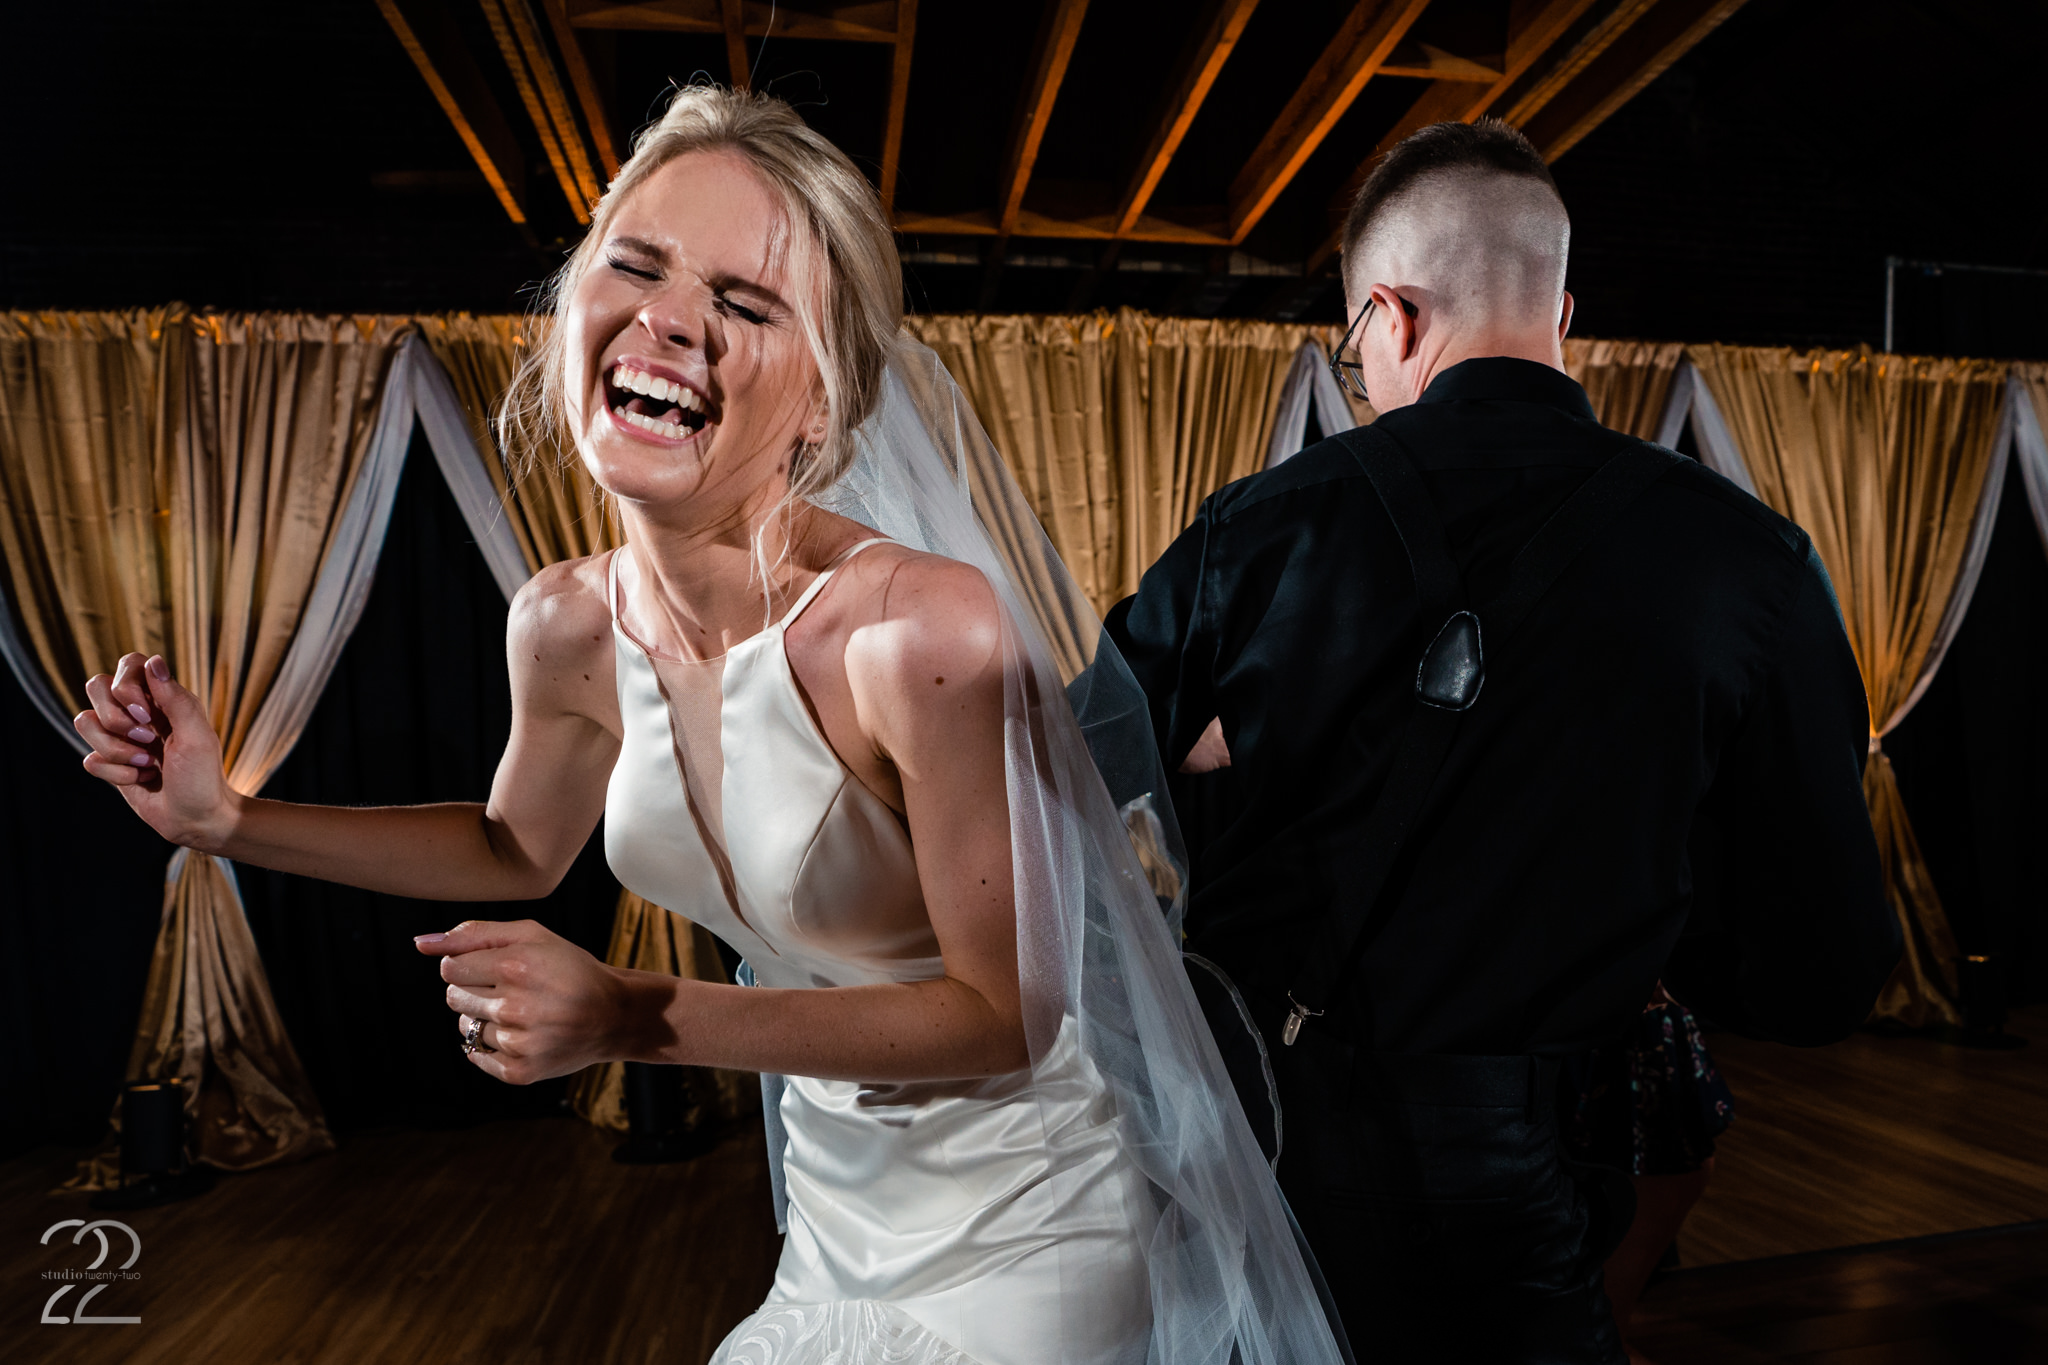  Your wedding should be one of the happiest and most fun days of your life. You are around the people that mean the most to you, have created a day that expresses who both are, and are marrying your best friend. So relax, laugh, smile, and get down! 